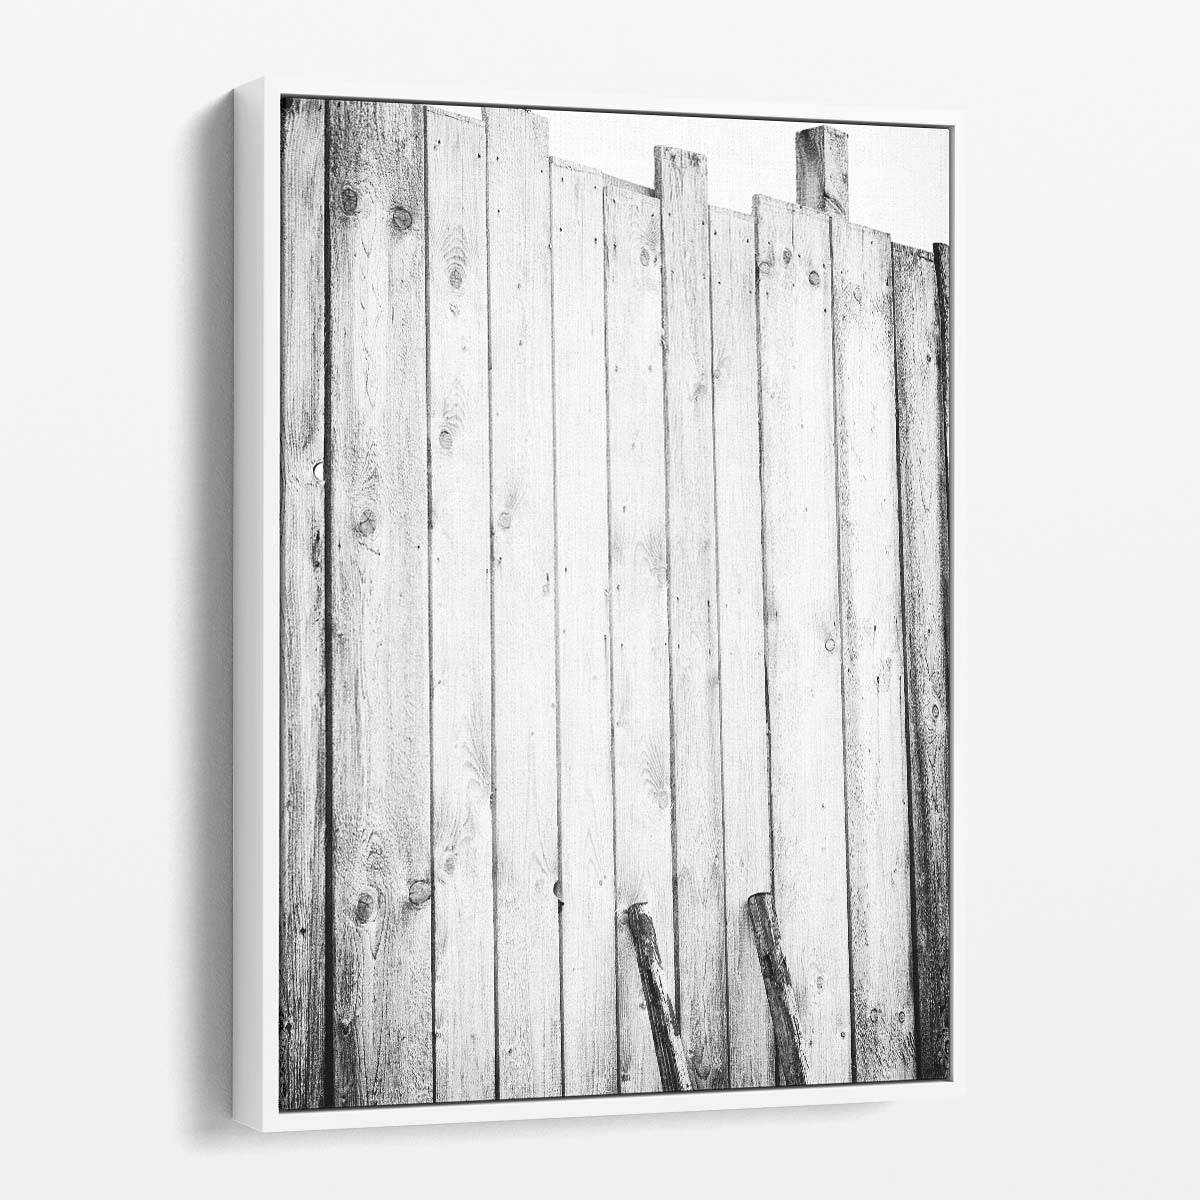 Lonely Bird Escaping Solitude - Black and White Photography Wall Art by Luxuriance Designs, made in USA